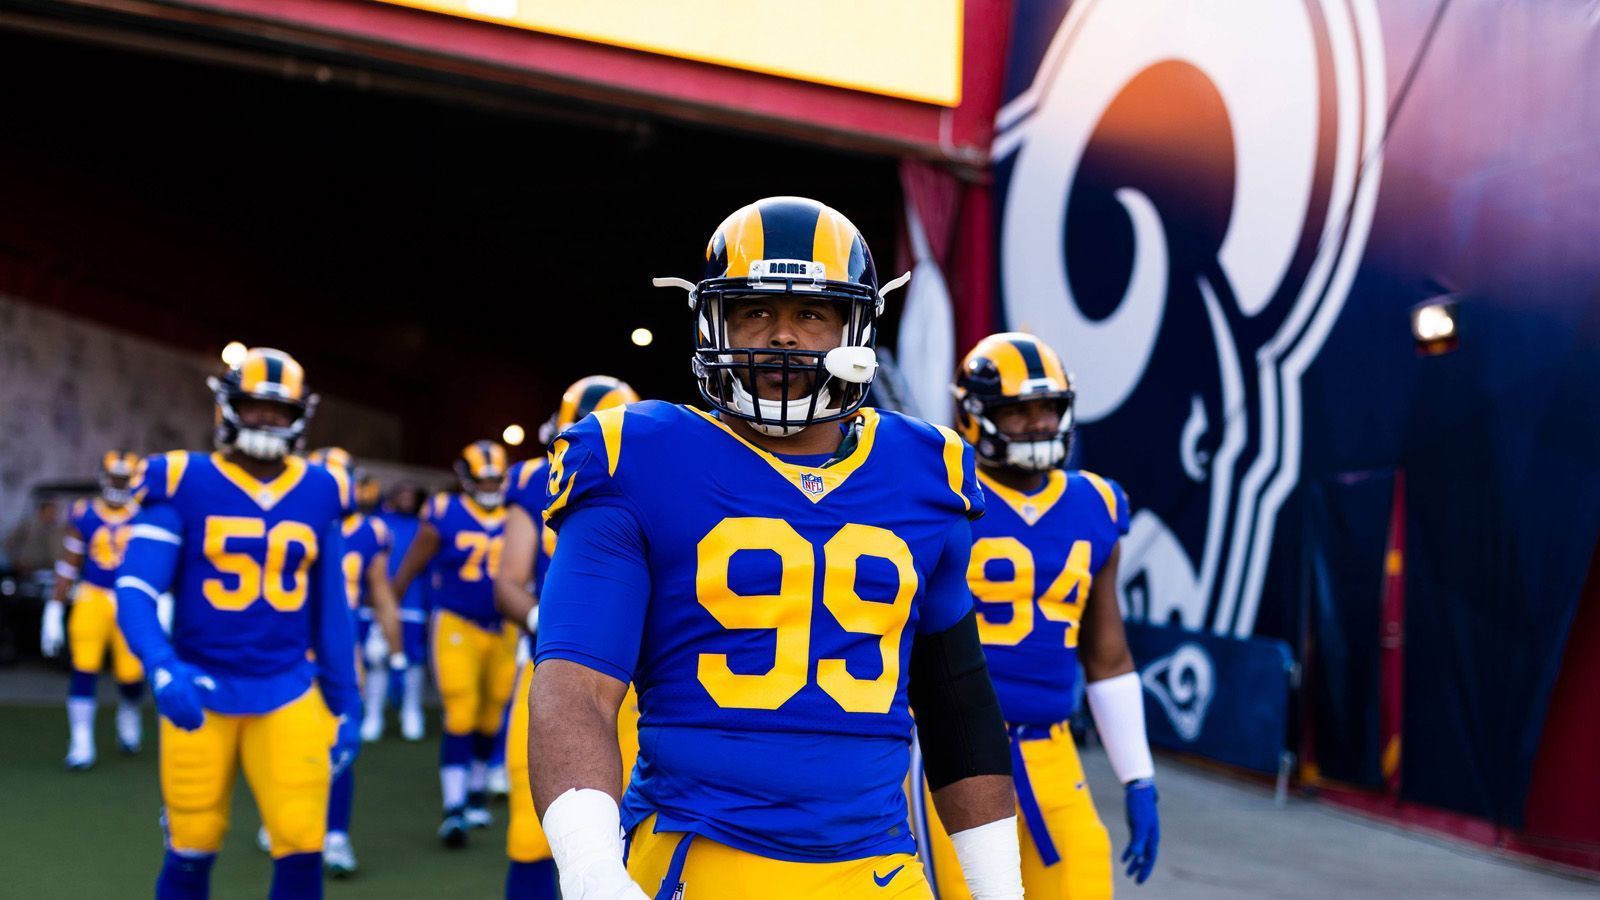 
                <strong>Los Angeles Rams</strong><br>
                Team Captains: Aaron Donald (DT), Aqib Talib (CB), Eric Weddle (S), Johnny Hekker (P), Jared Goff (QB), Andrew Whitworth (OT)
              